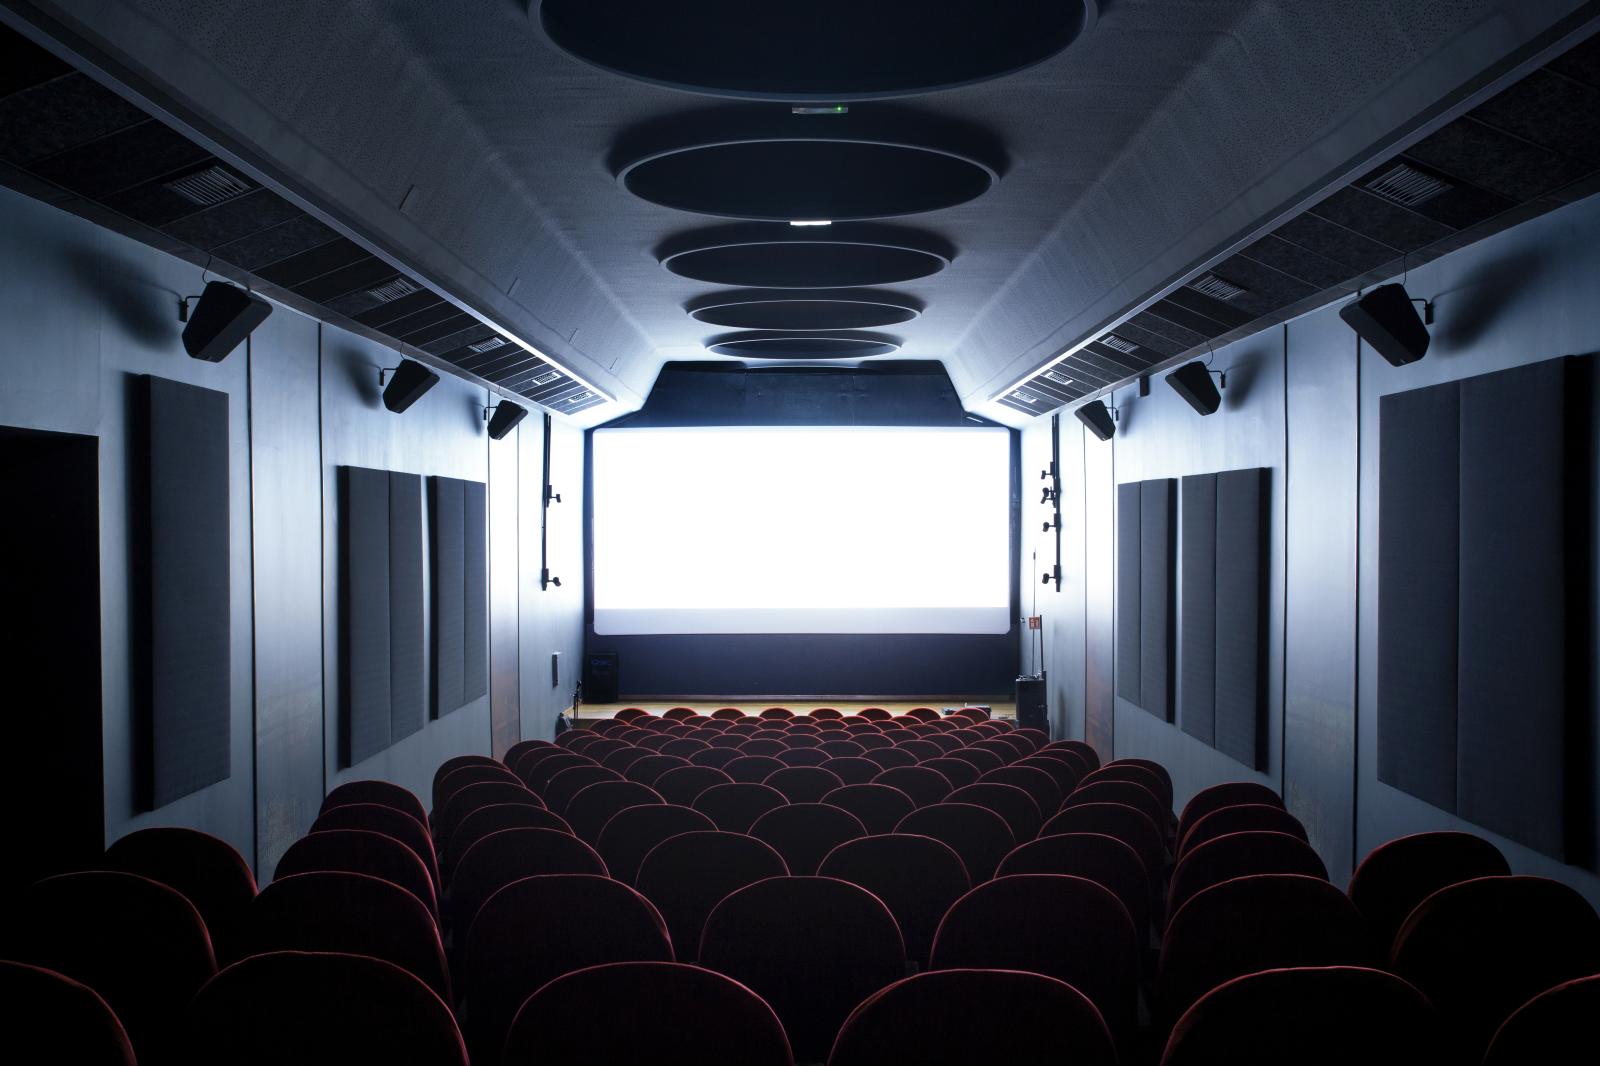 A screening room at the Cinema Centrale, Turin (Italy)